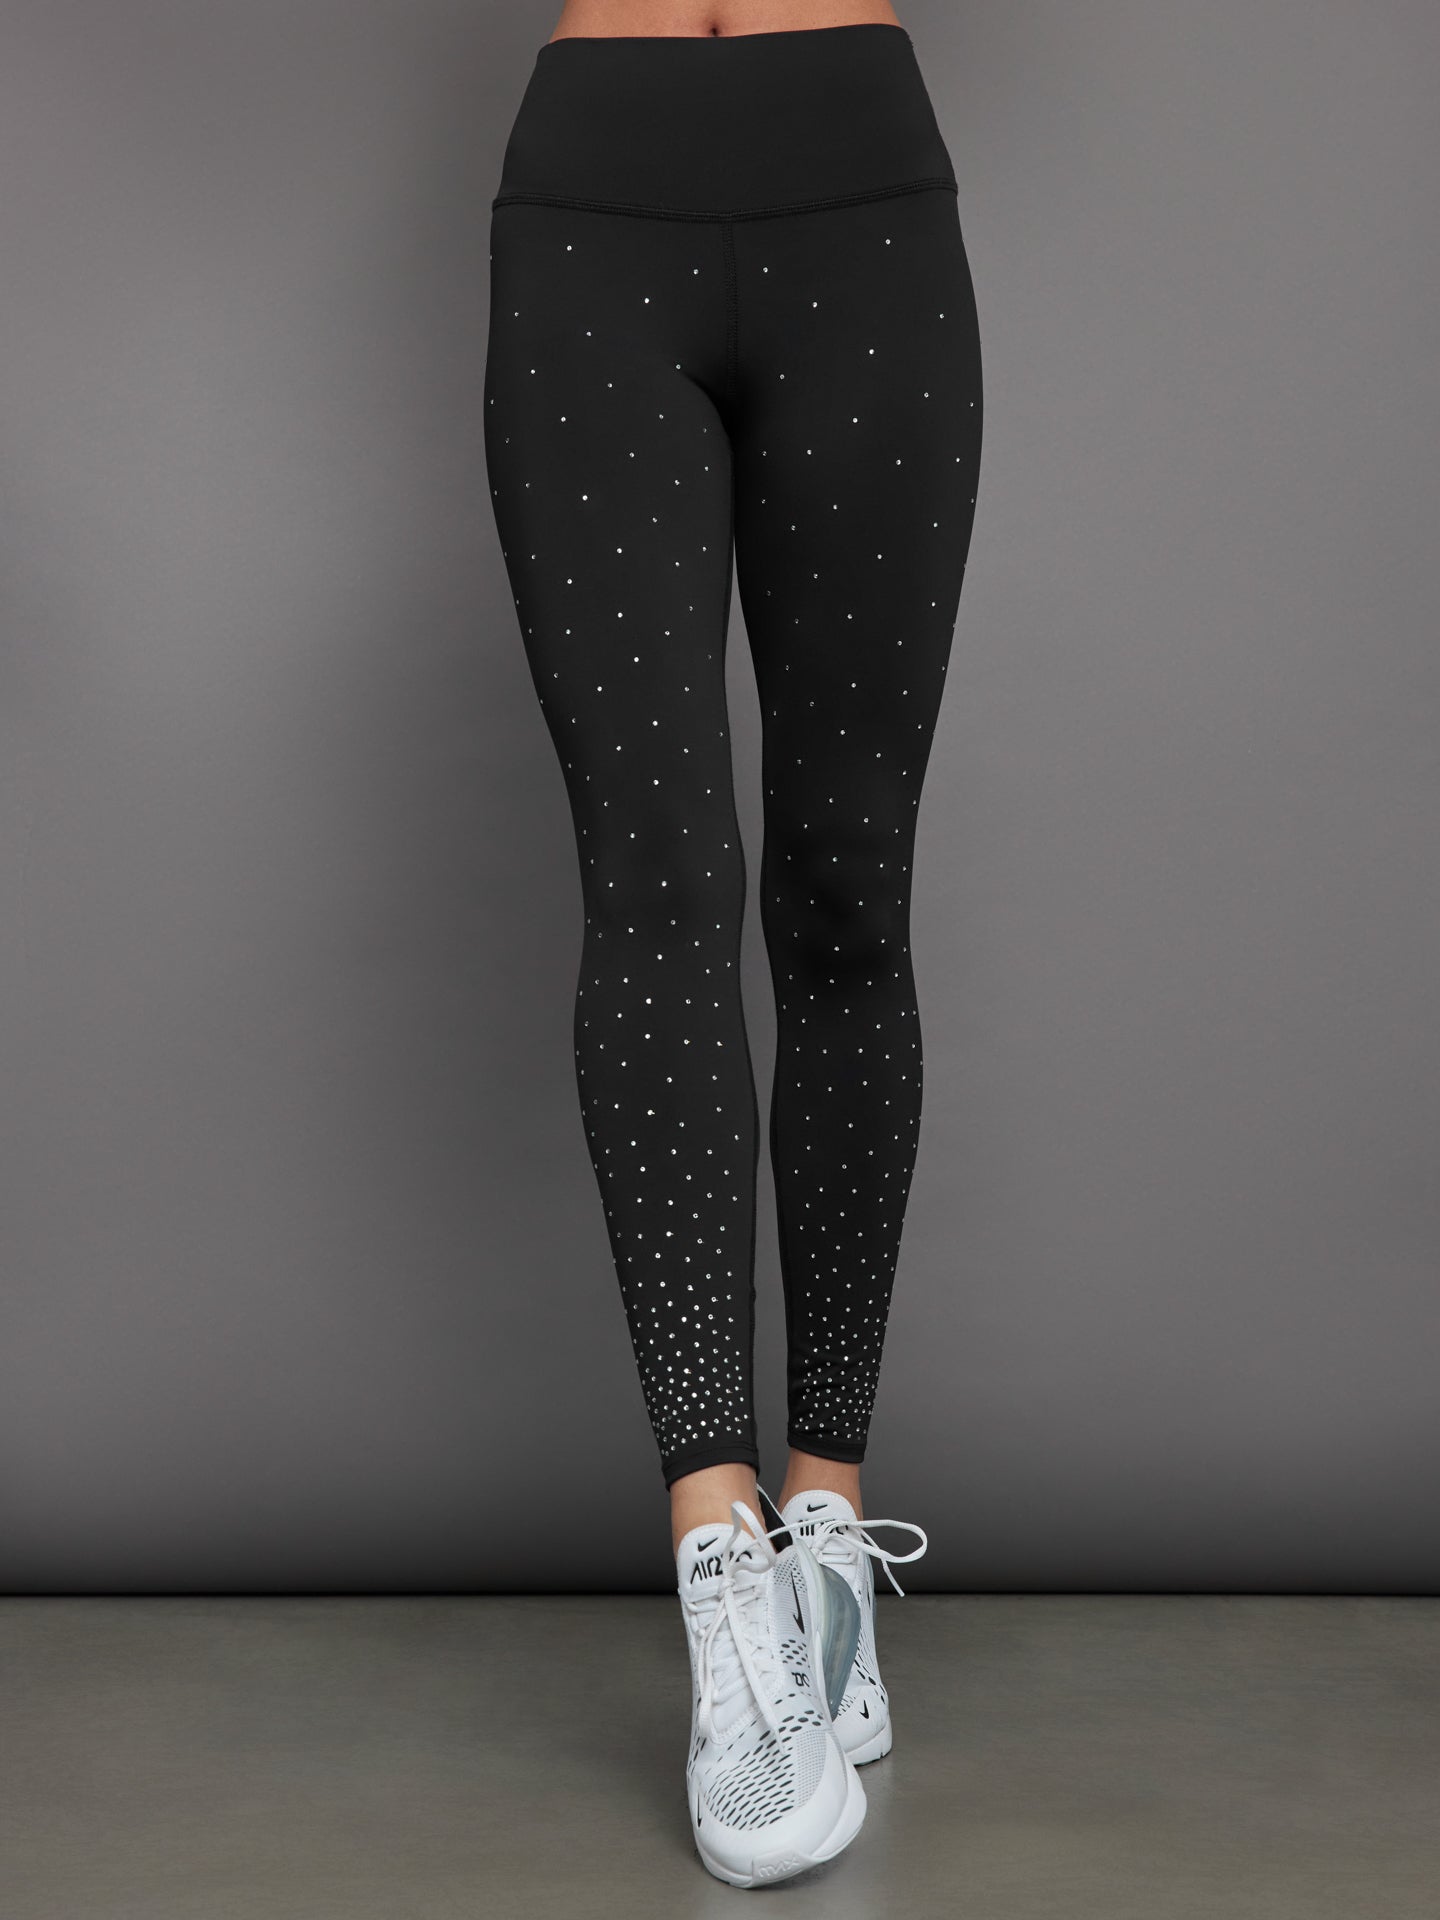 CARBON38 Floral High Rise Leggings XS - Clothing